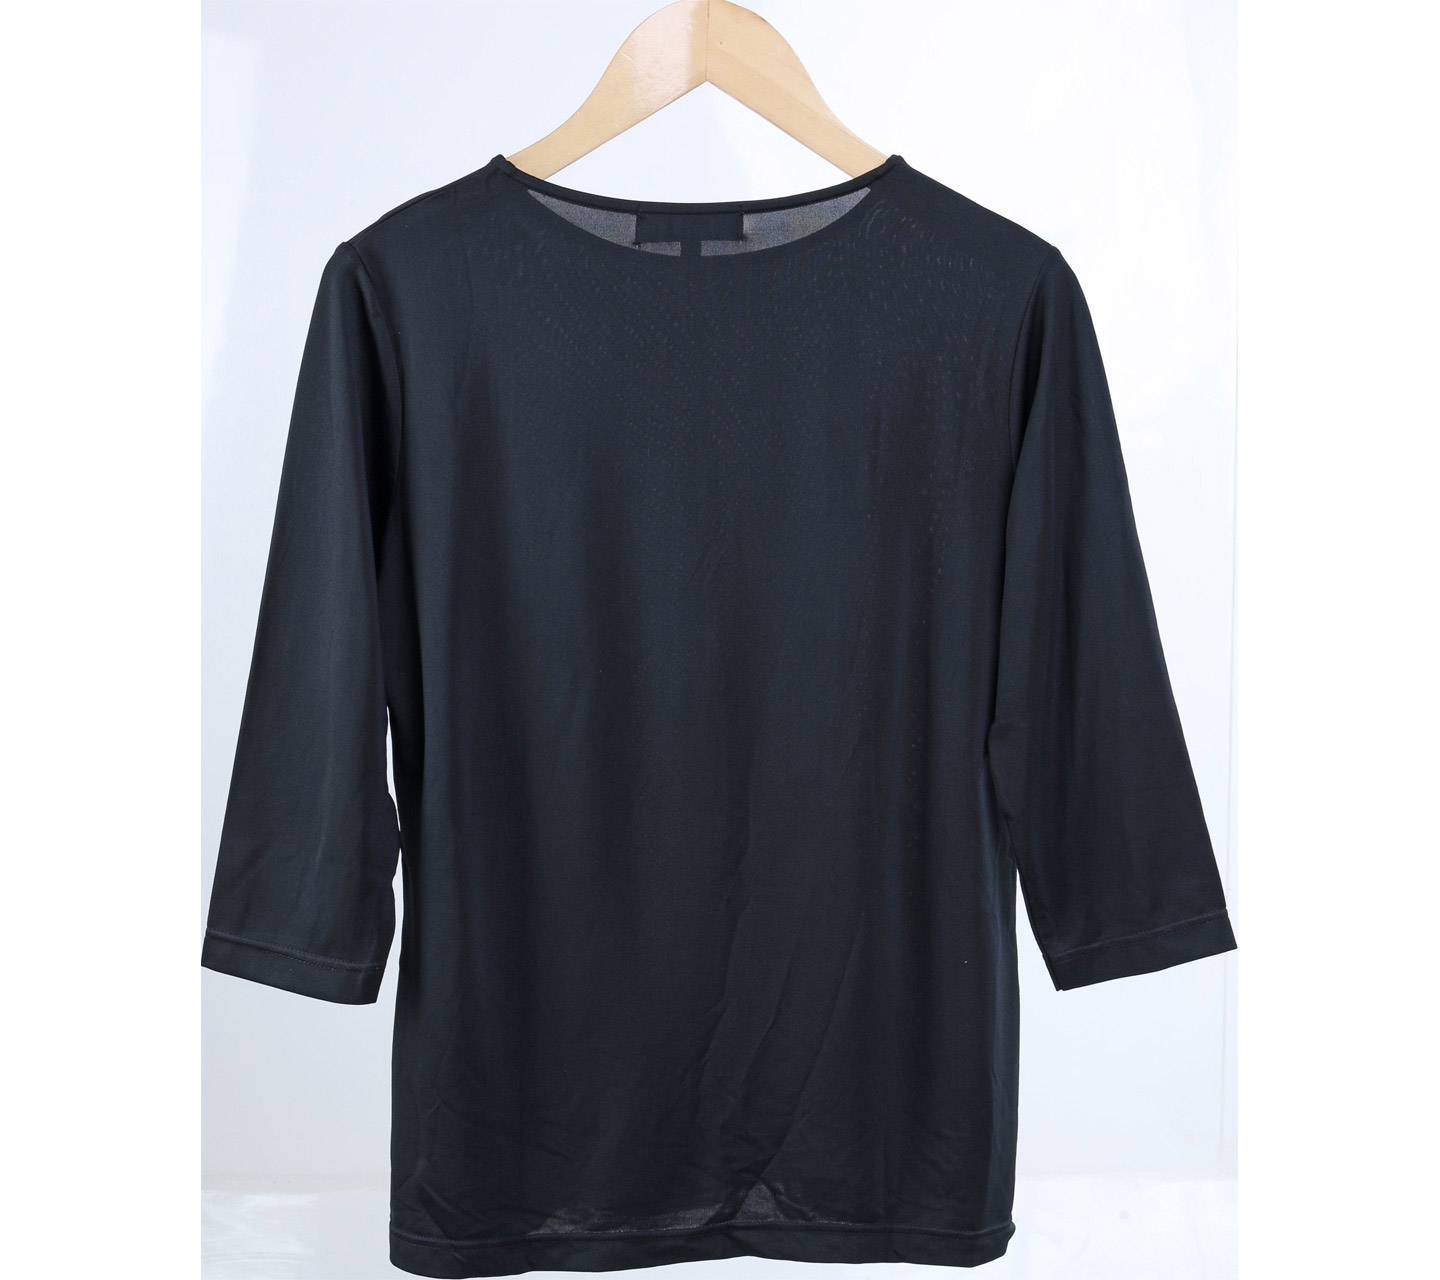 P.S. The Spirit Of Personal Style Black Blouse